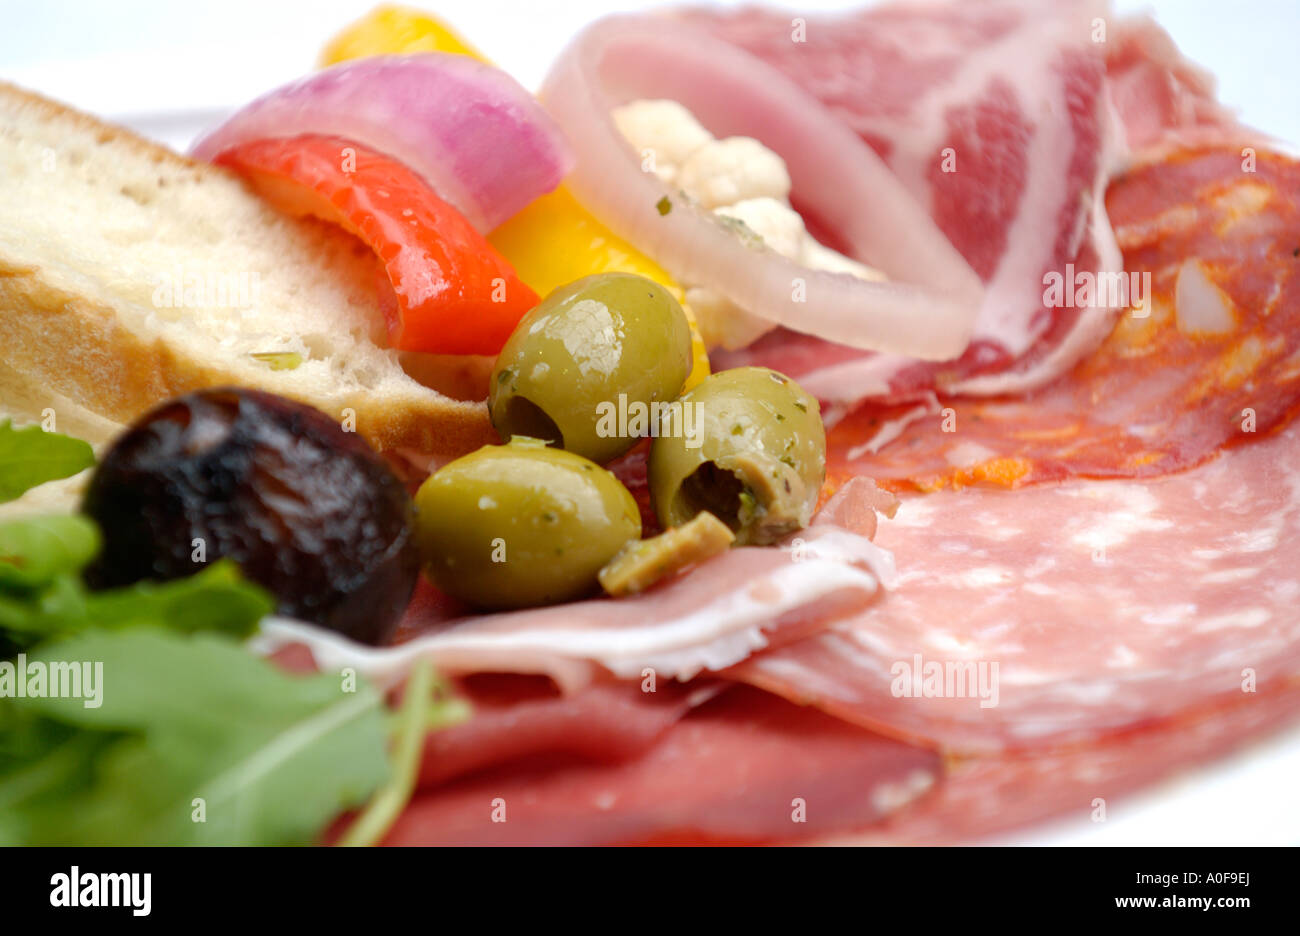 Salumi Misti with garnish for £5 by The Walnut Tree restaurant at the annual Abergavenny Food Festival Monmouthshire Wales UK Stock Photo